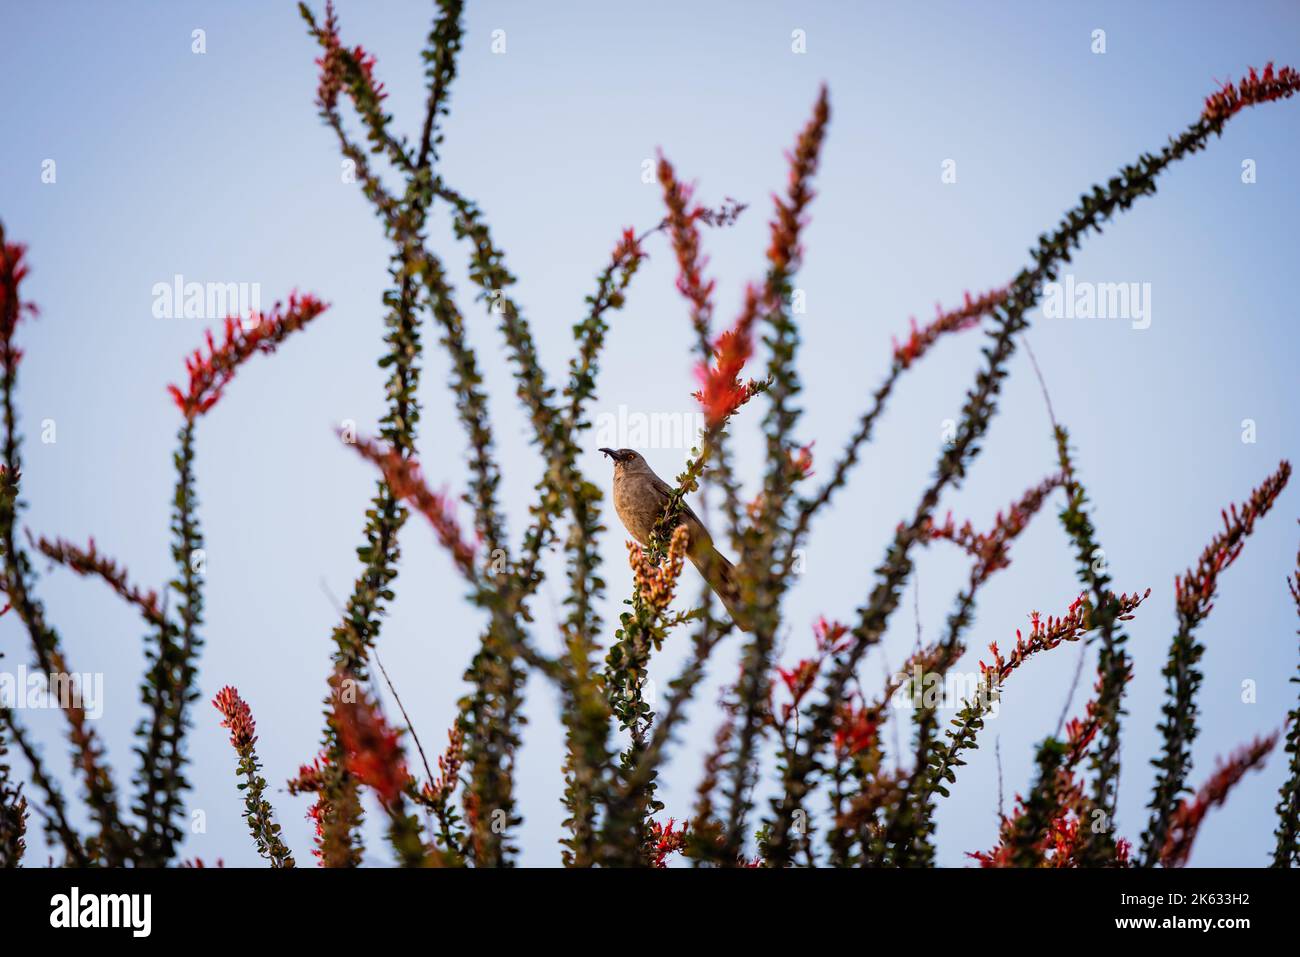 Curve-billed thrasher, Toxostoma curvirostre, perched on Ocotillo branches with red flowers in Sun City, Arizona. Stock Photo